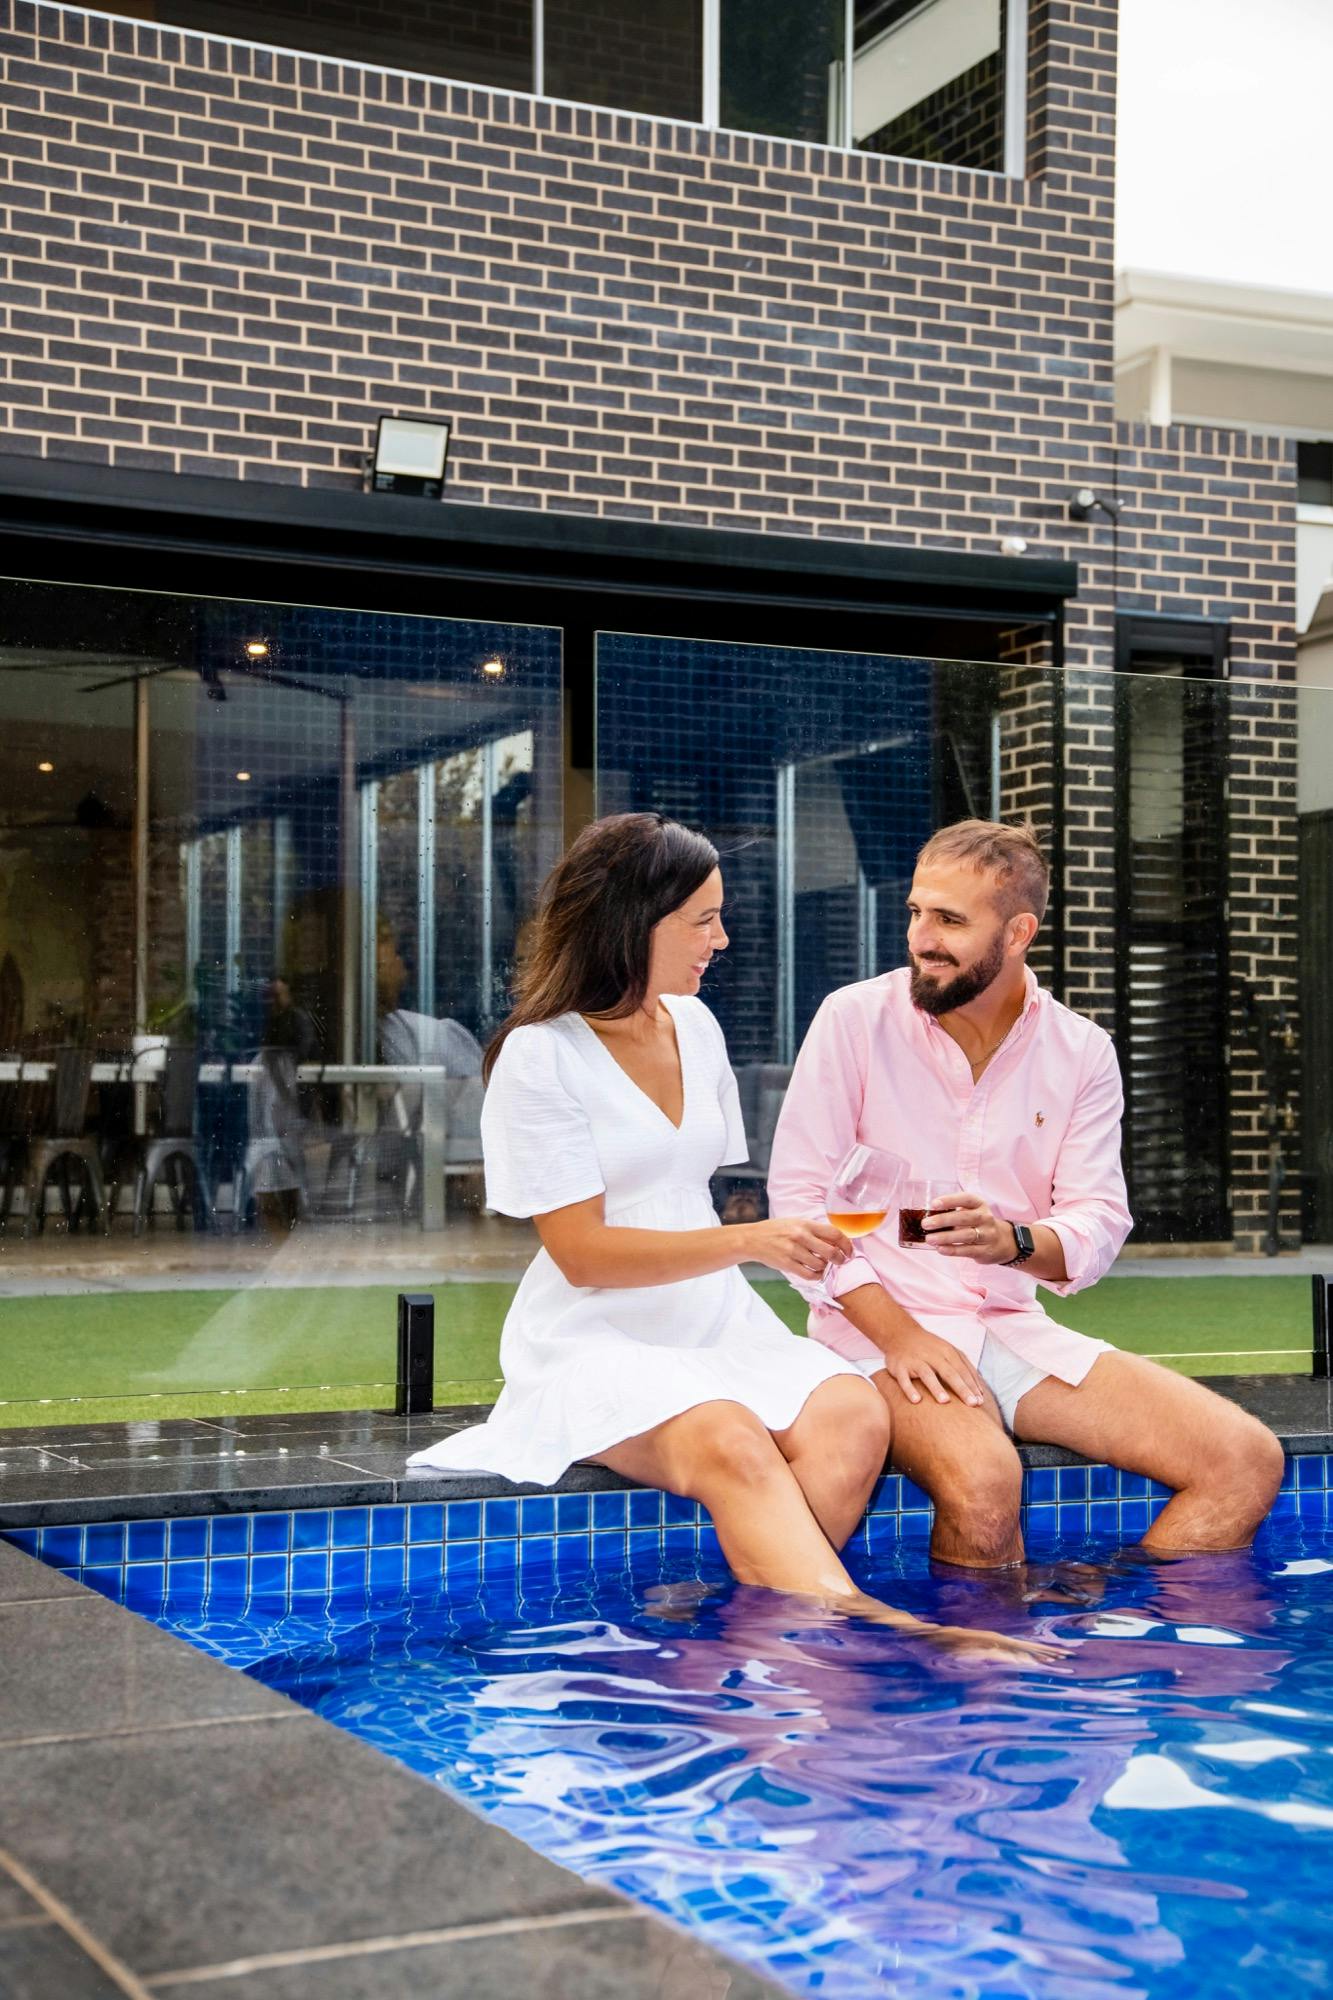 Swimming pool and couple drinking wine